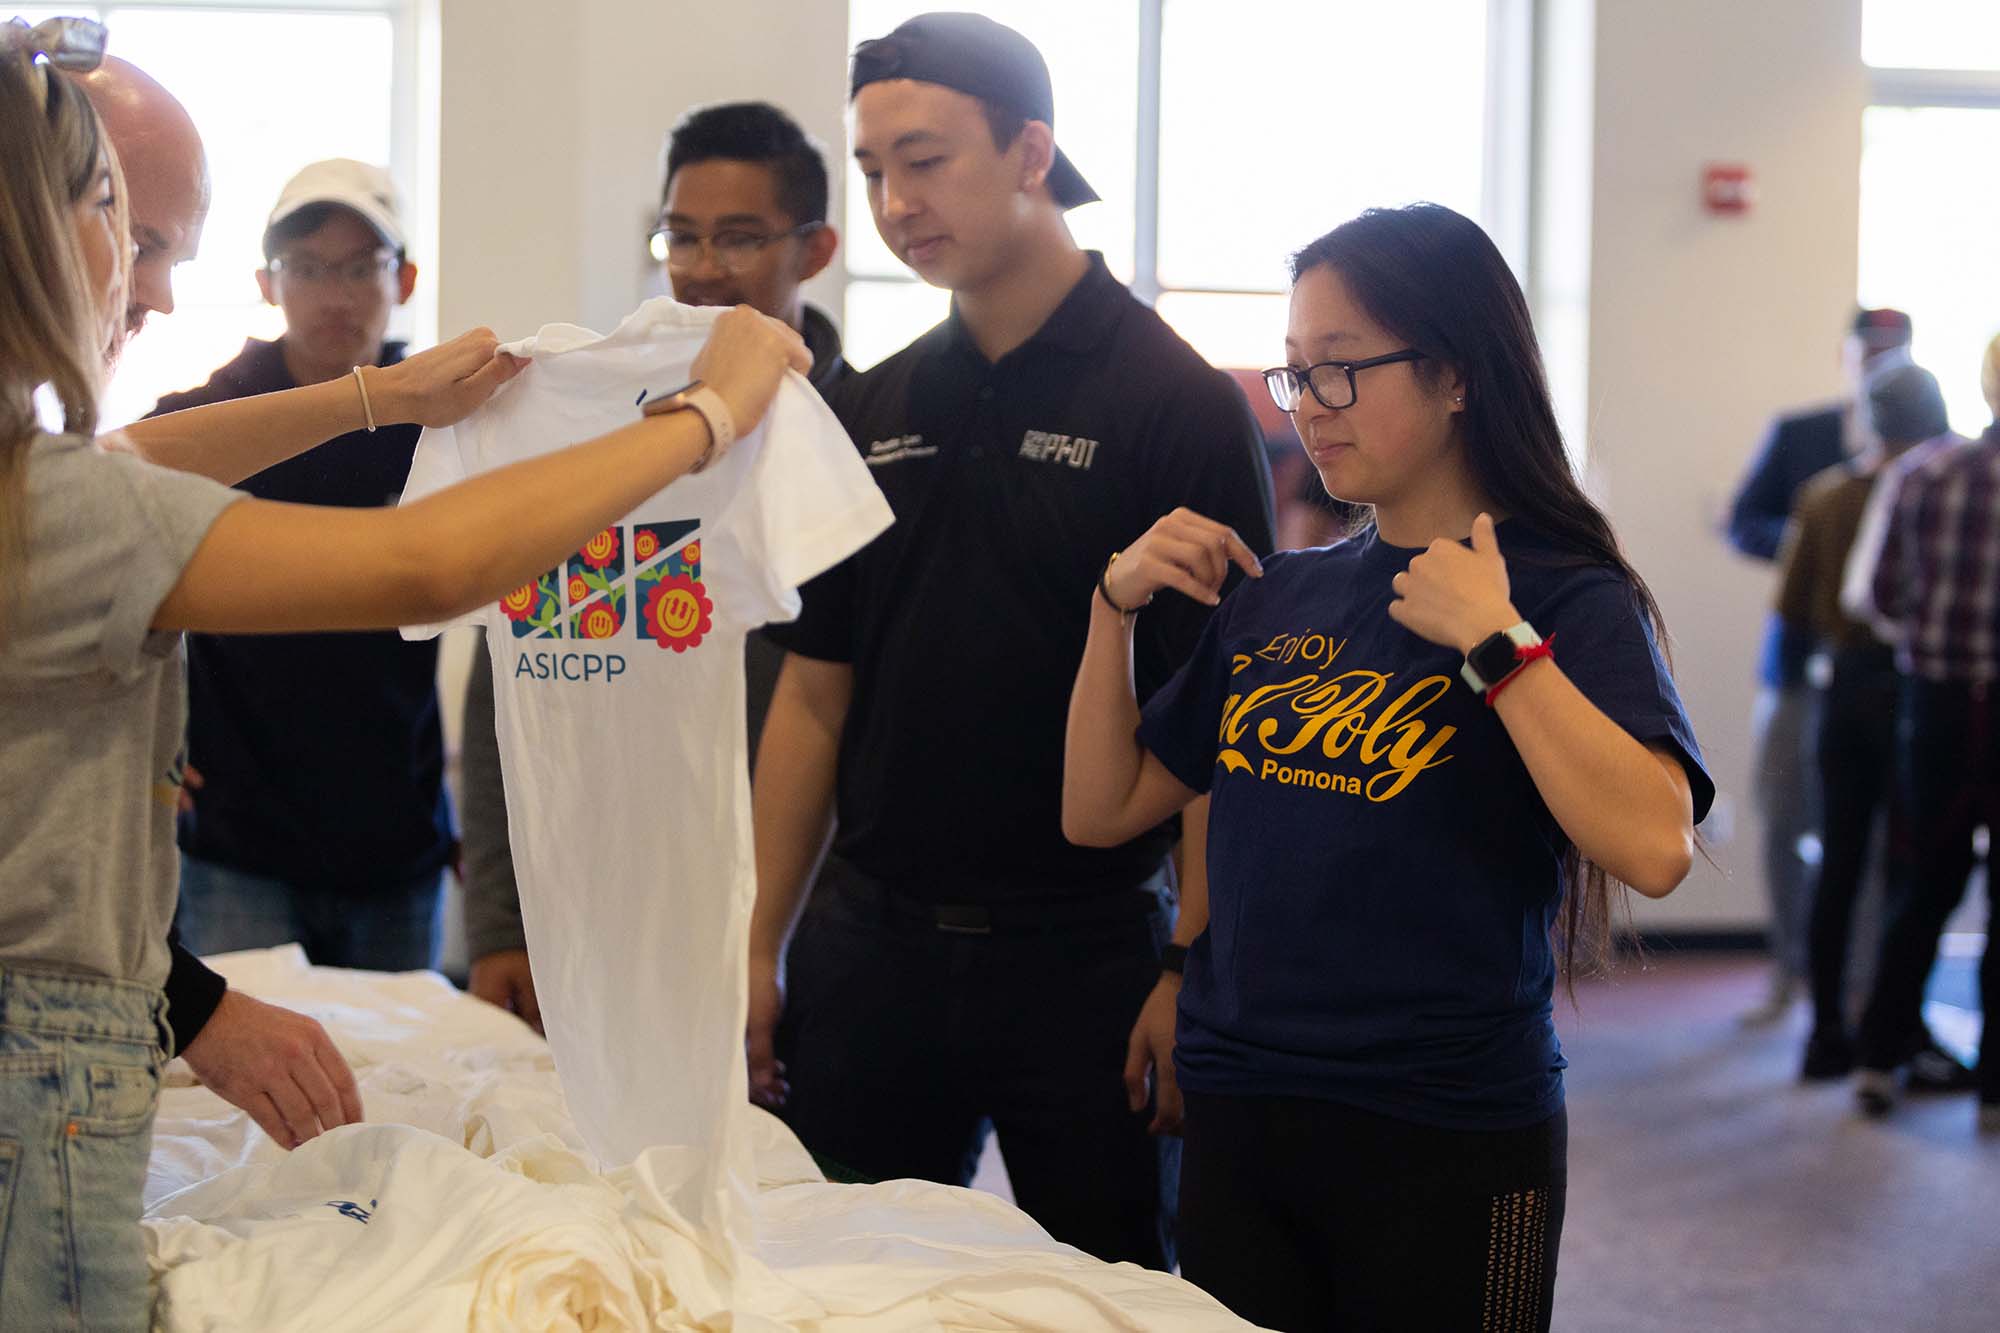 staff handing out t-shirts to students